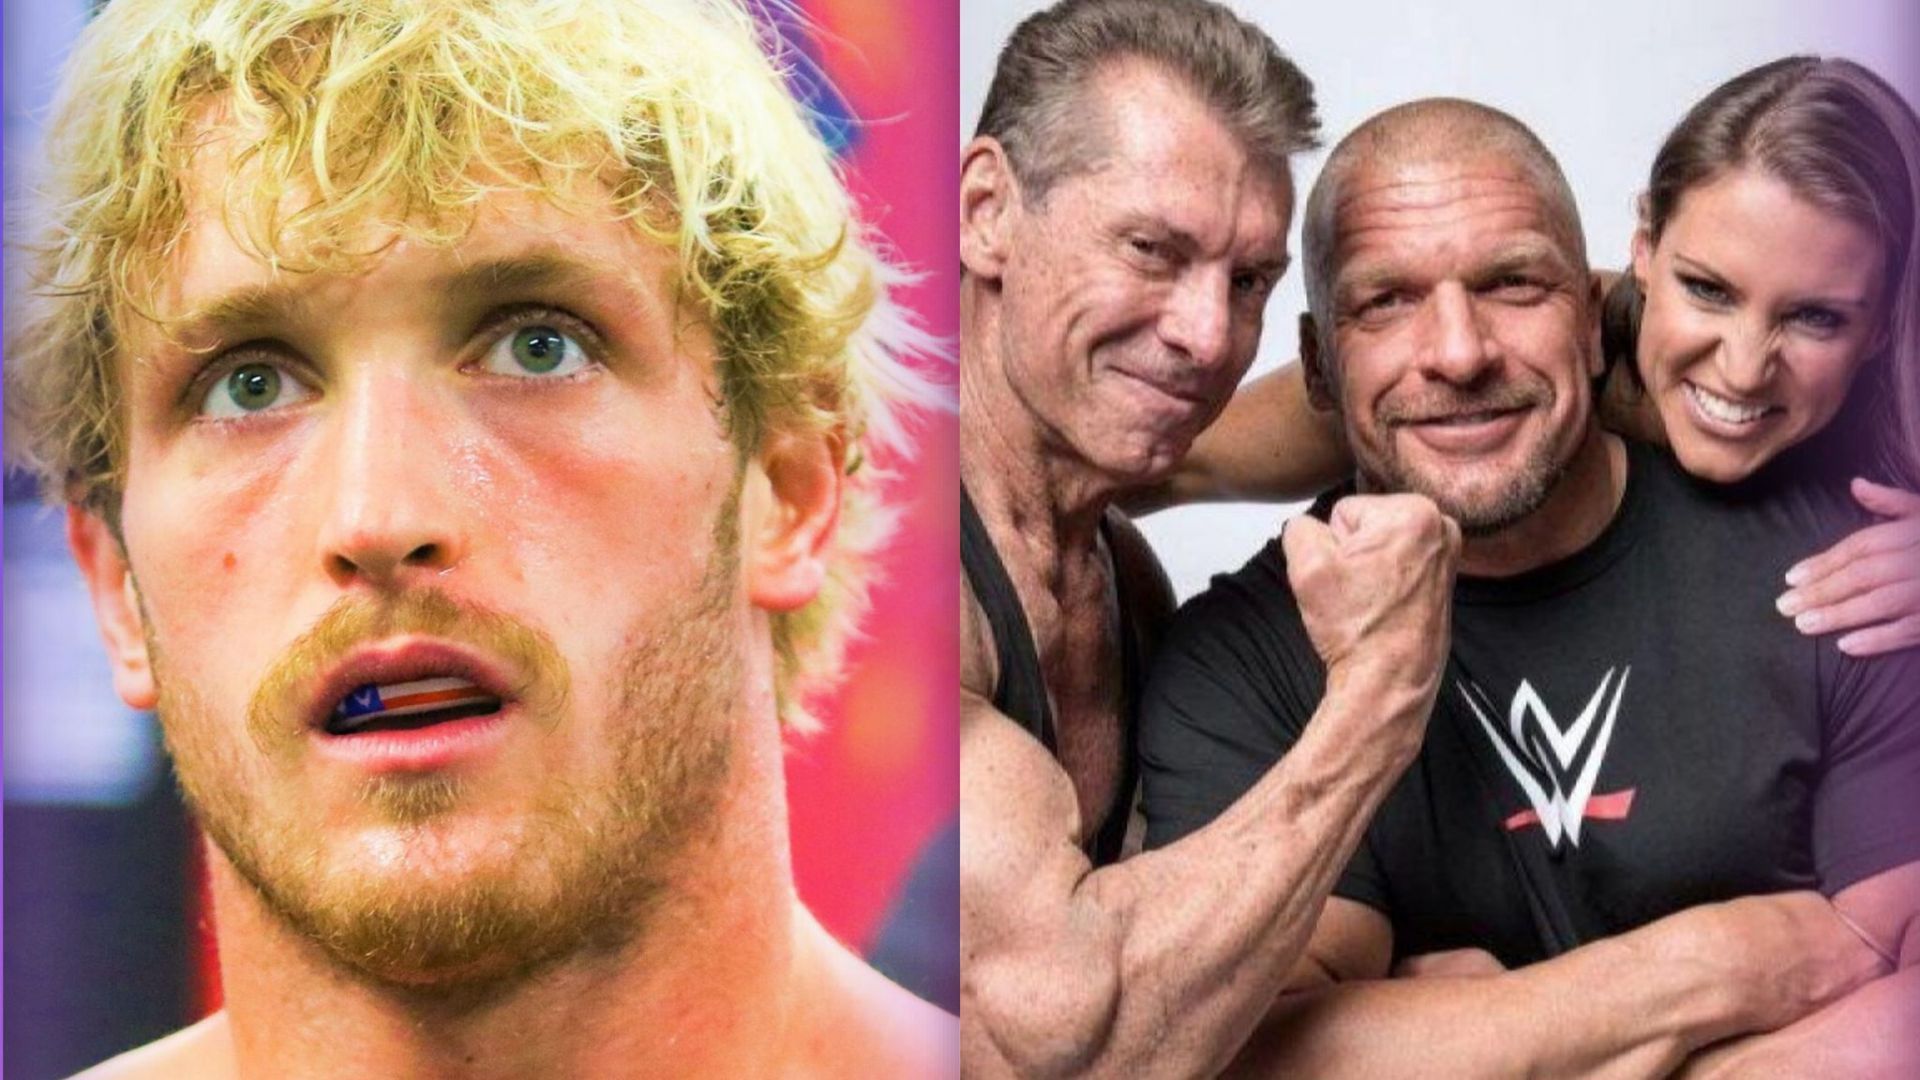 Logan Paul recently signed a contract with WWE.